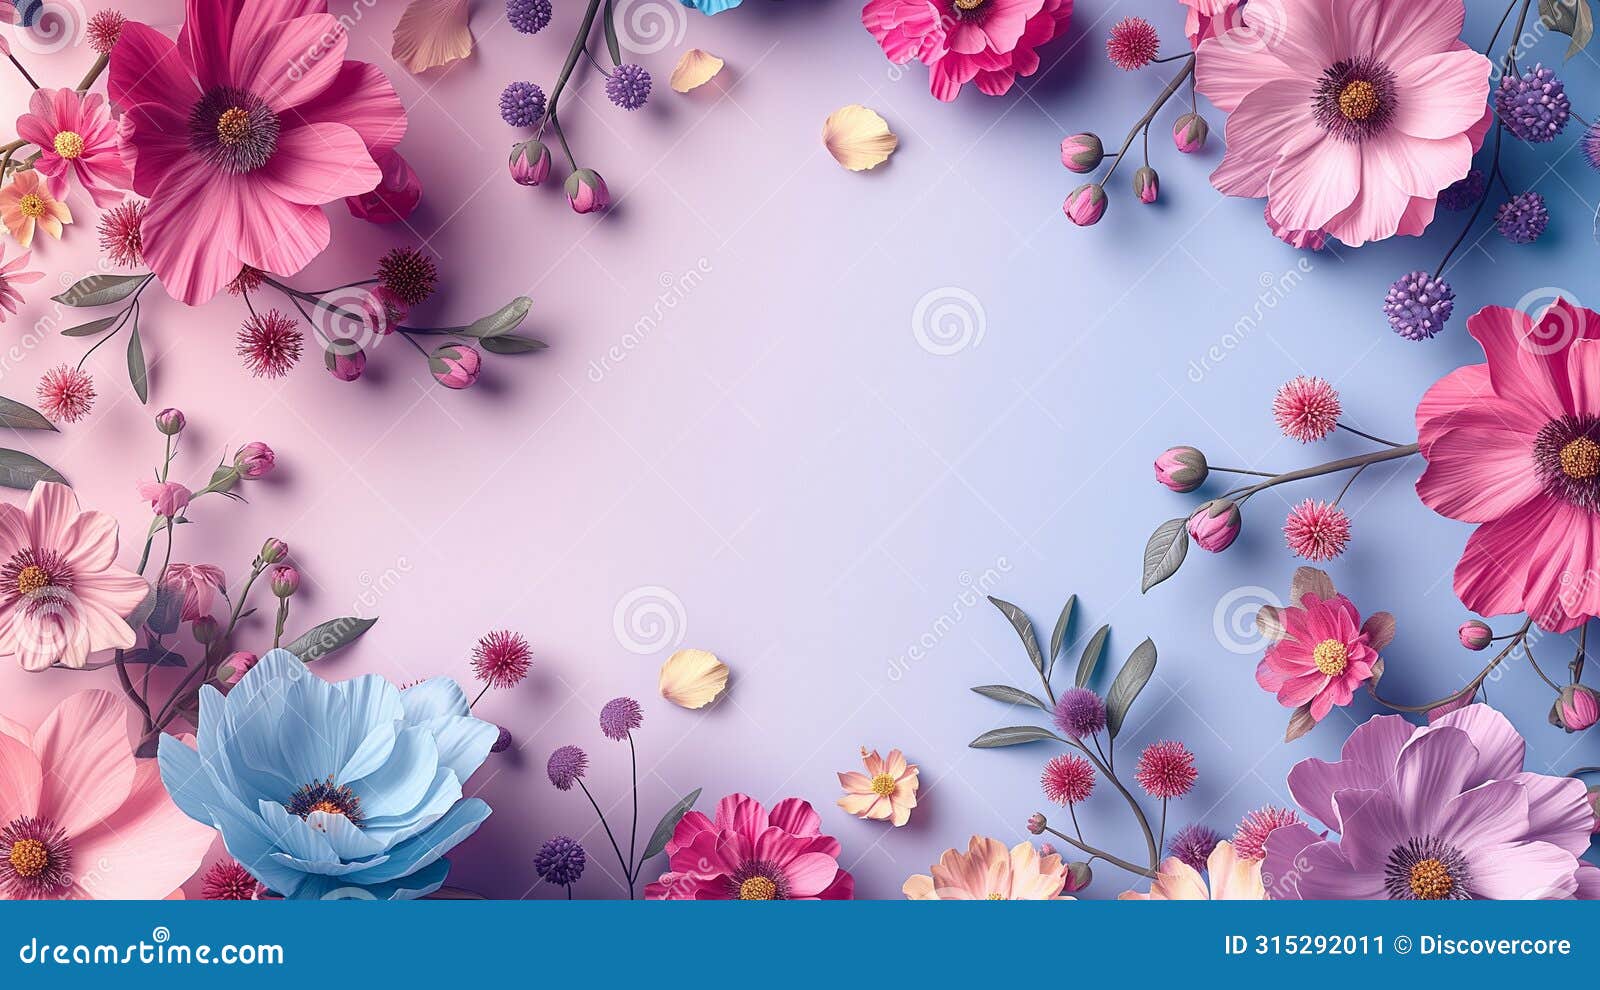 delicate pastel flowers on a pastel background